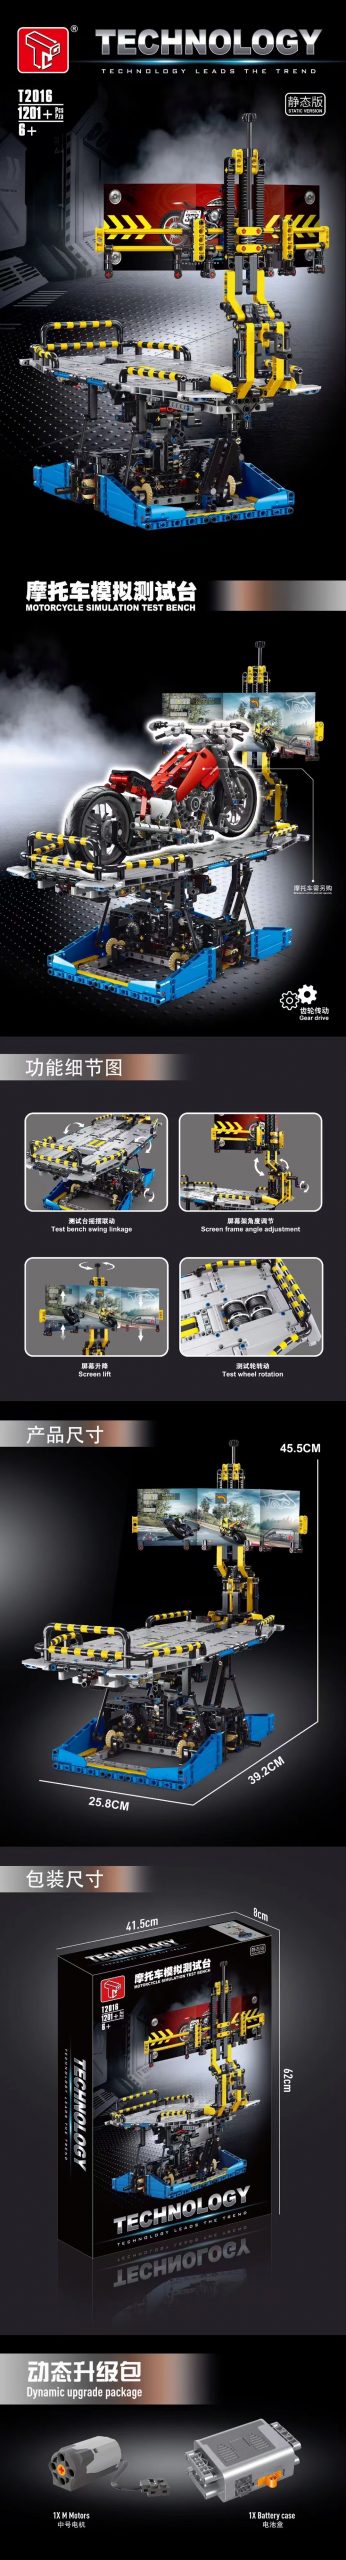 TGL T2016 Motorcycle Test Bench with 1201 pieces